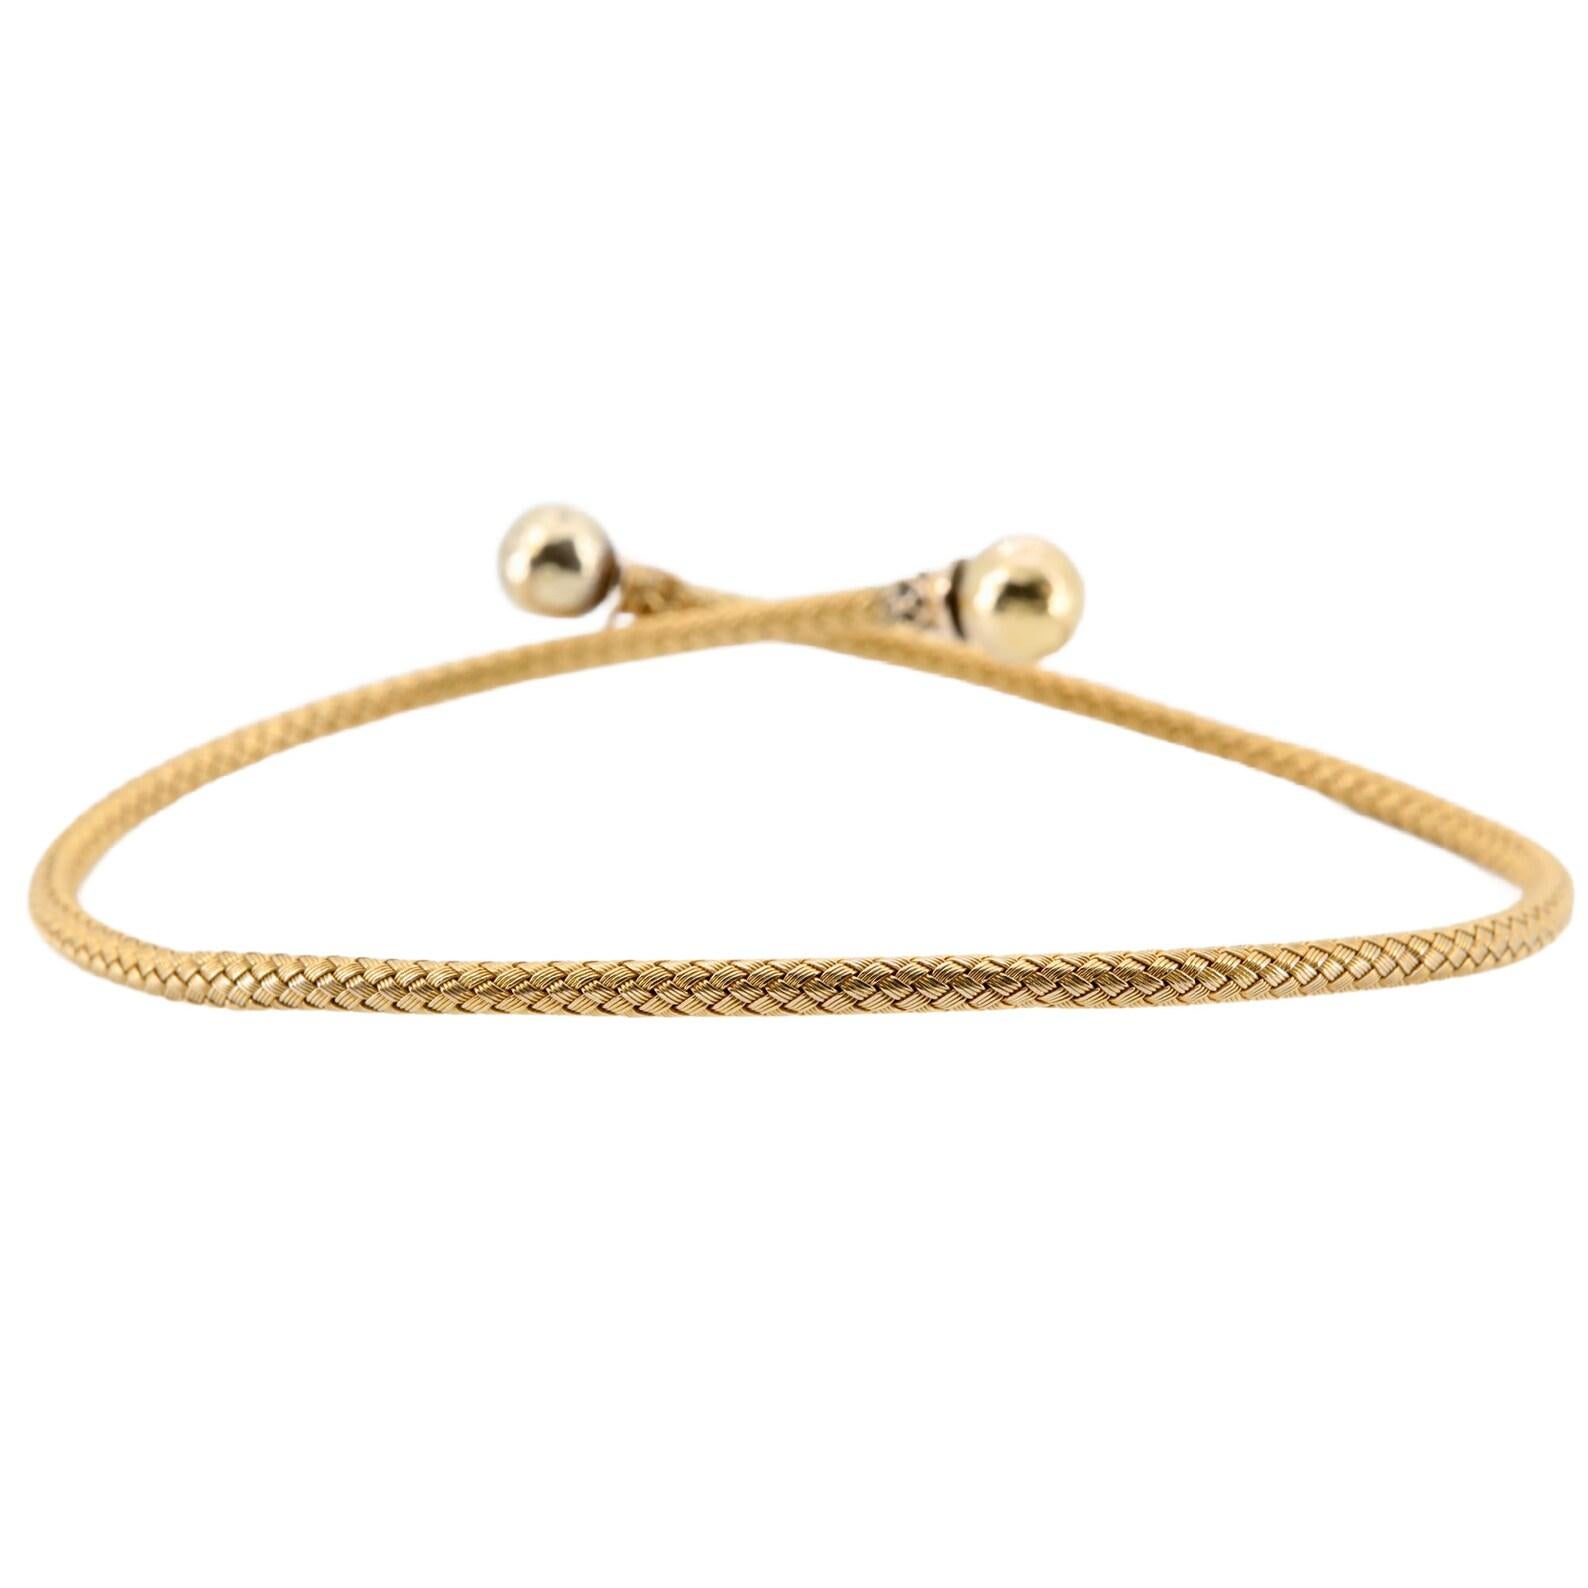 Victorian Etruscan Revival Woven Gold Bypass Bracelet In Good Condition For Sale In Boston, MA